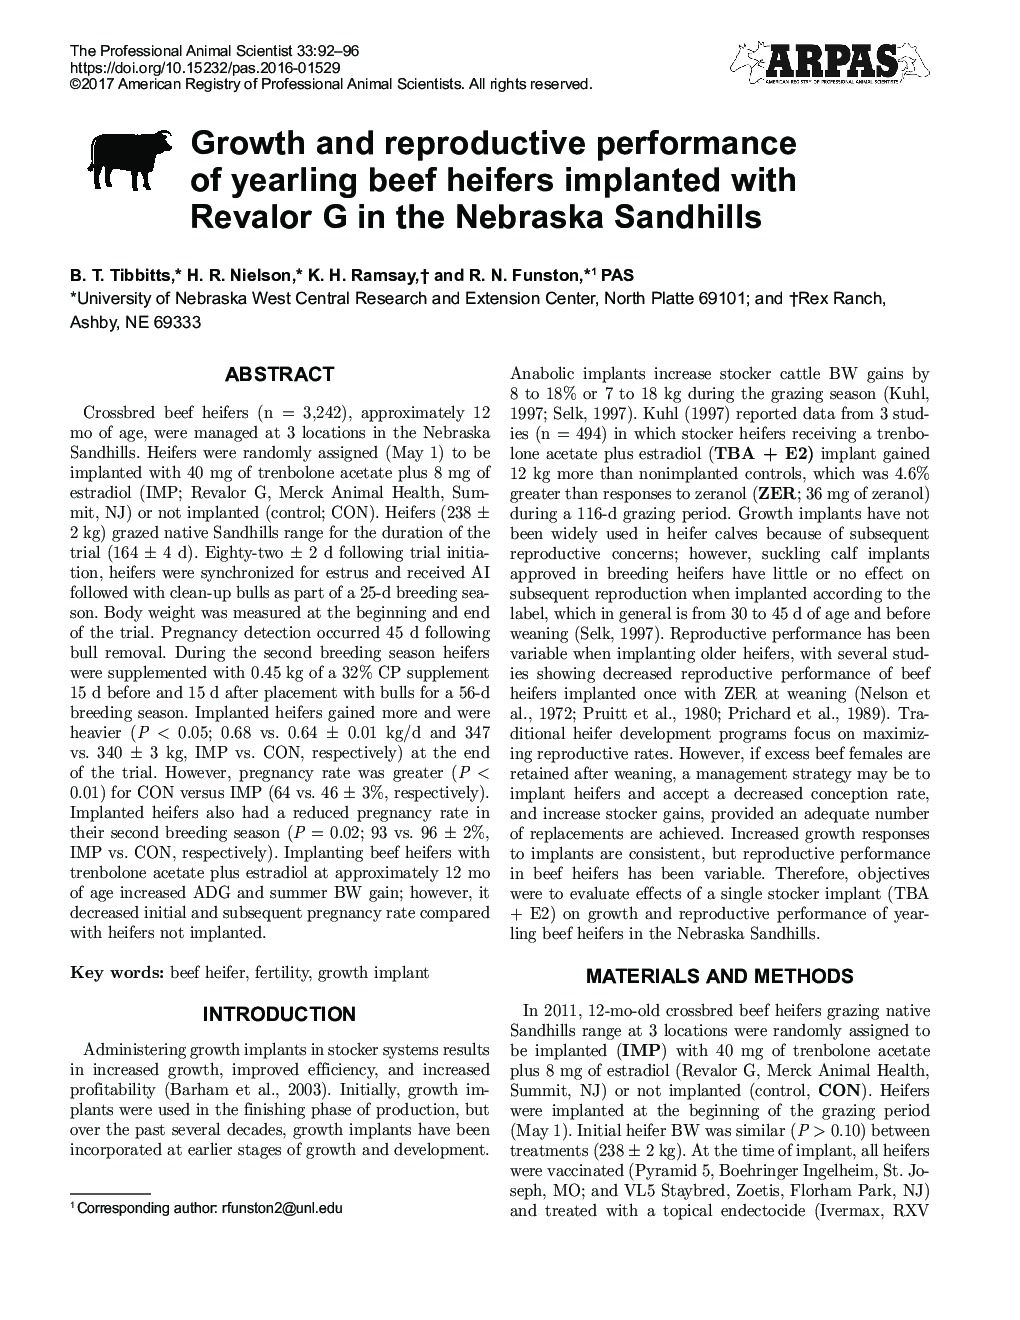 Growth and reproductive performance of yearling beef heifers implanted with Revalor G in the Nebraska Sandhills